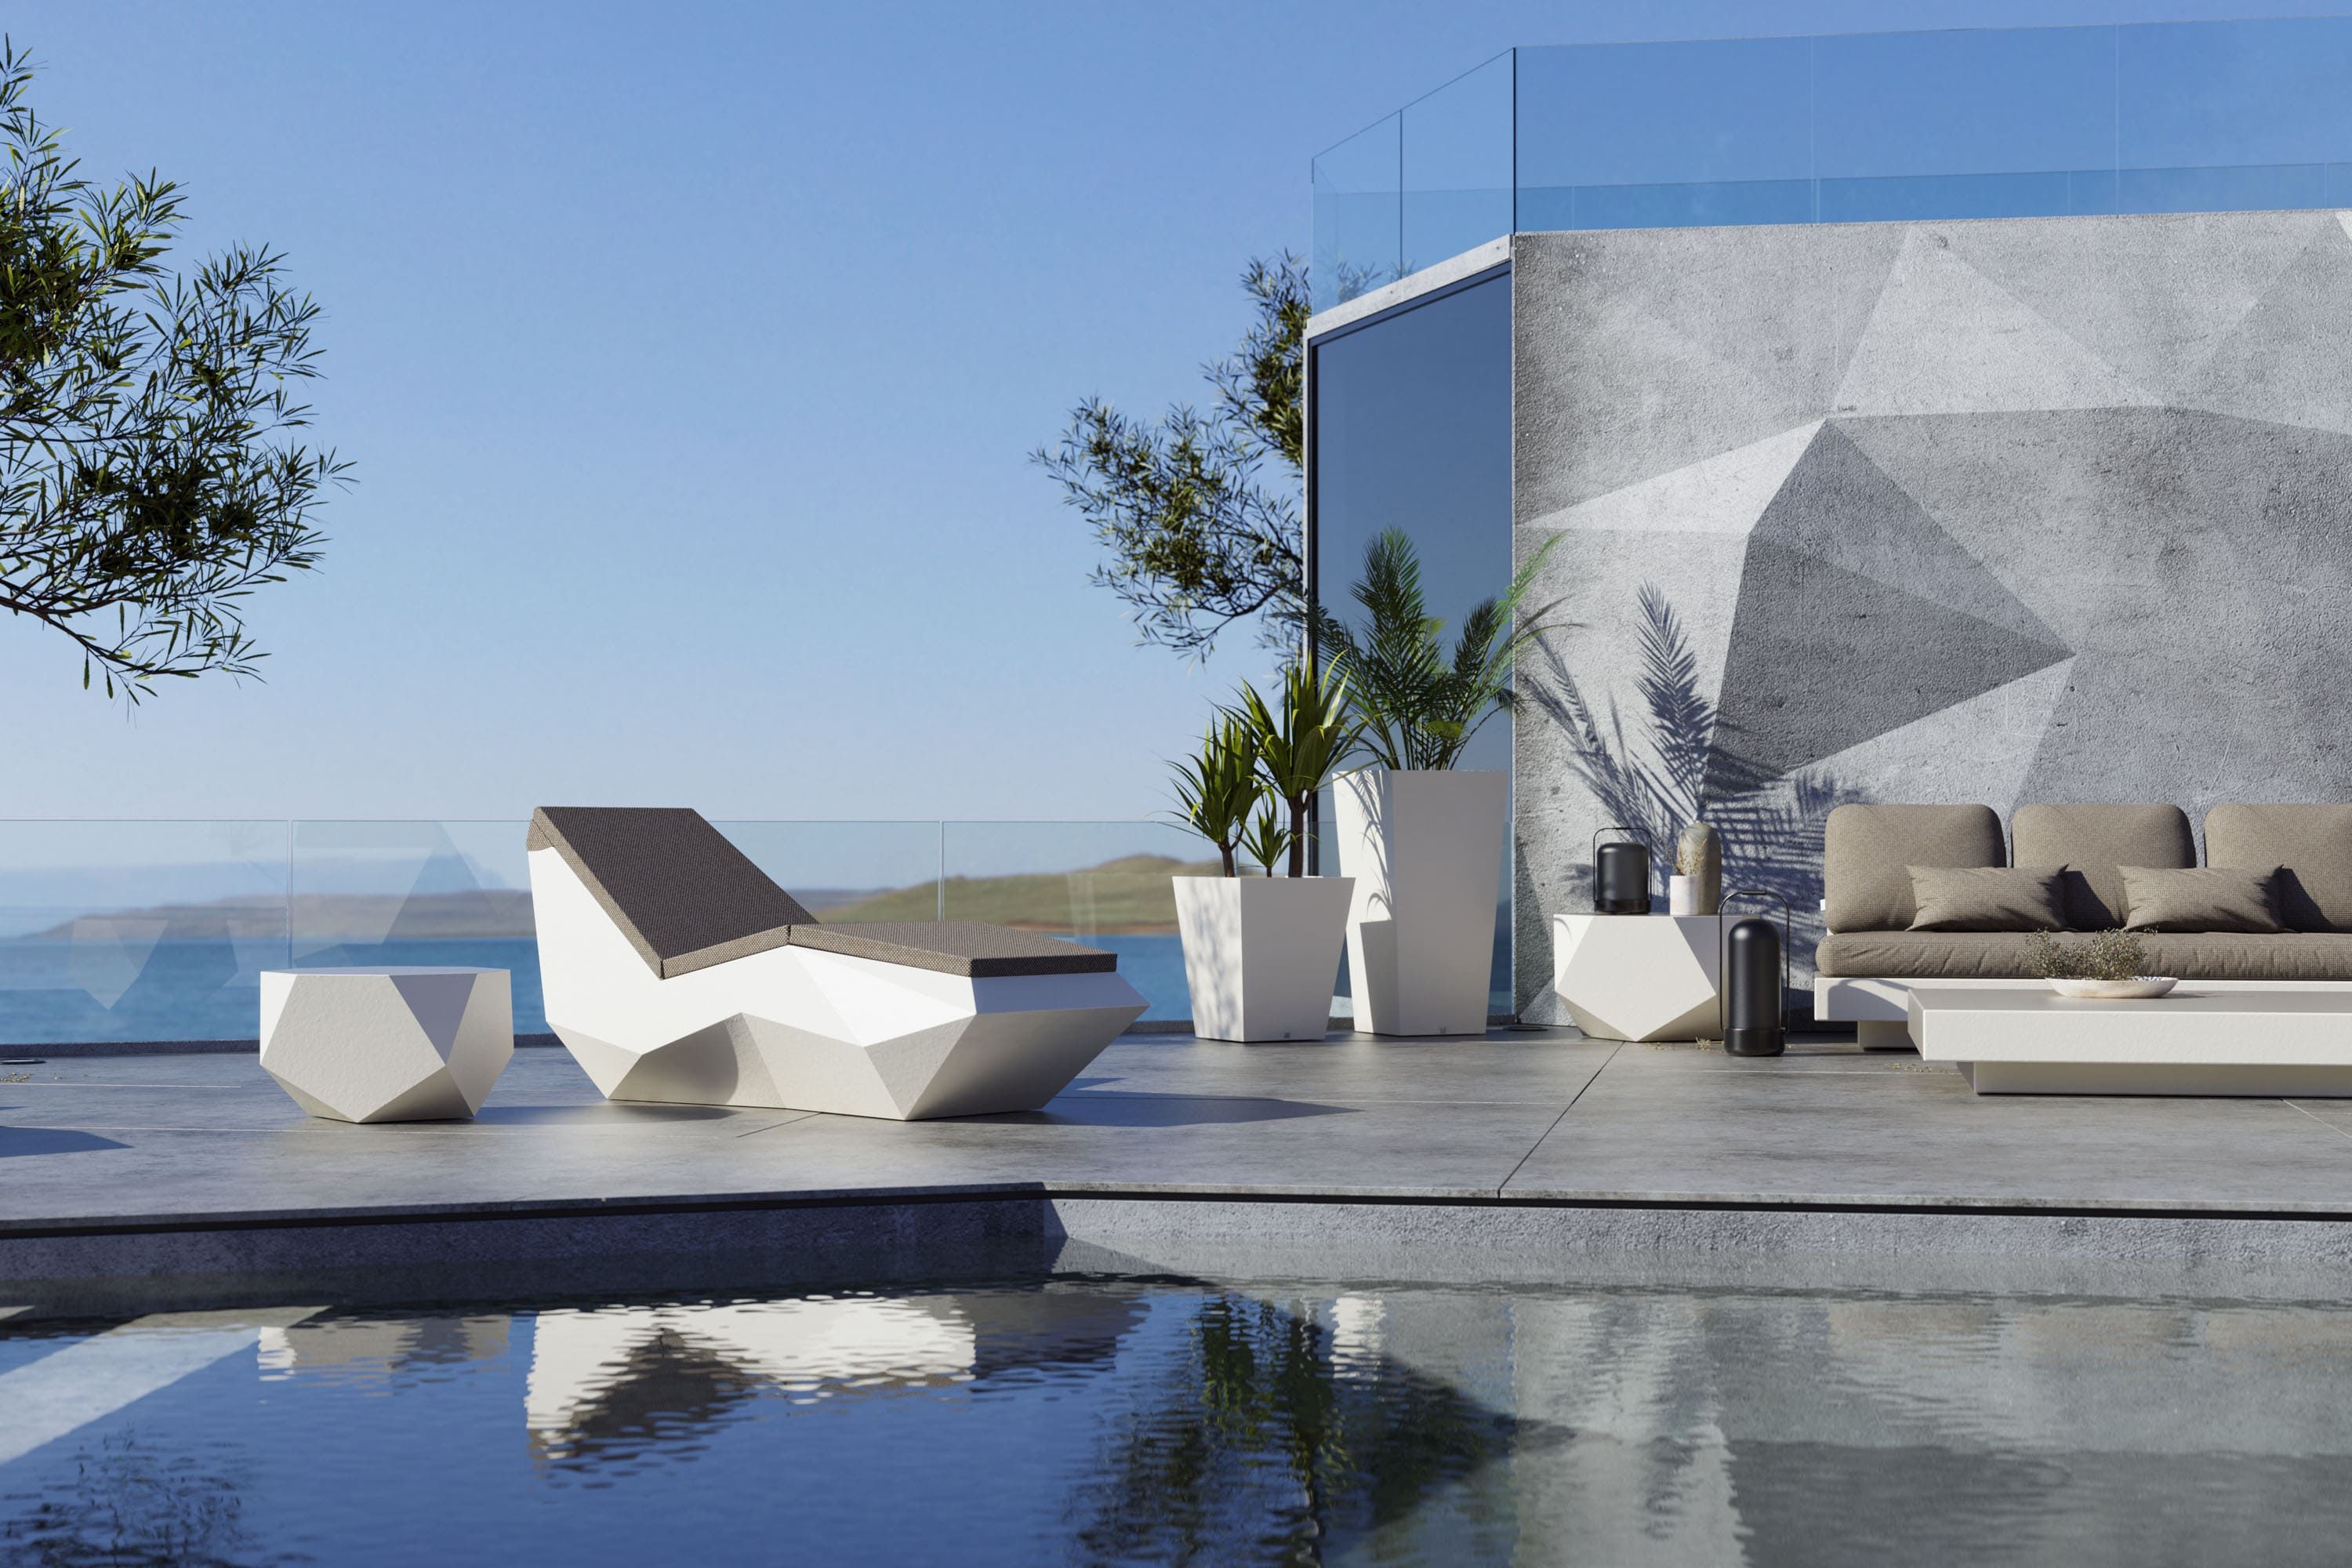 Relaxation environment at the pool with chaise lounge and table Diamond, Nordic and Quadra tables